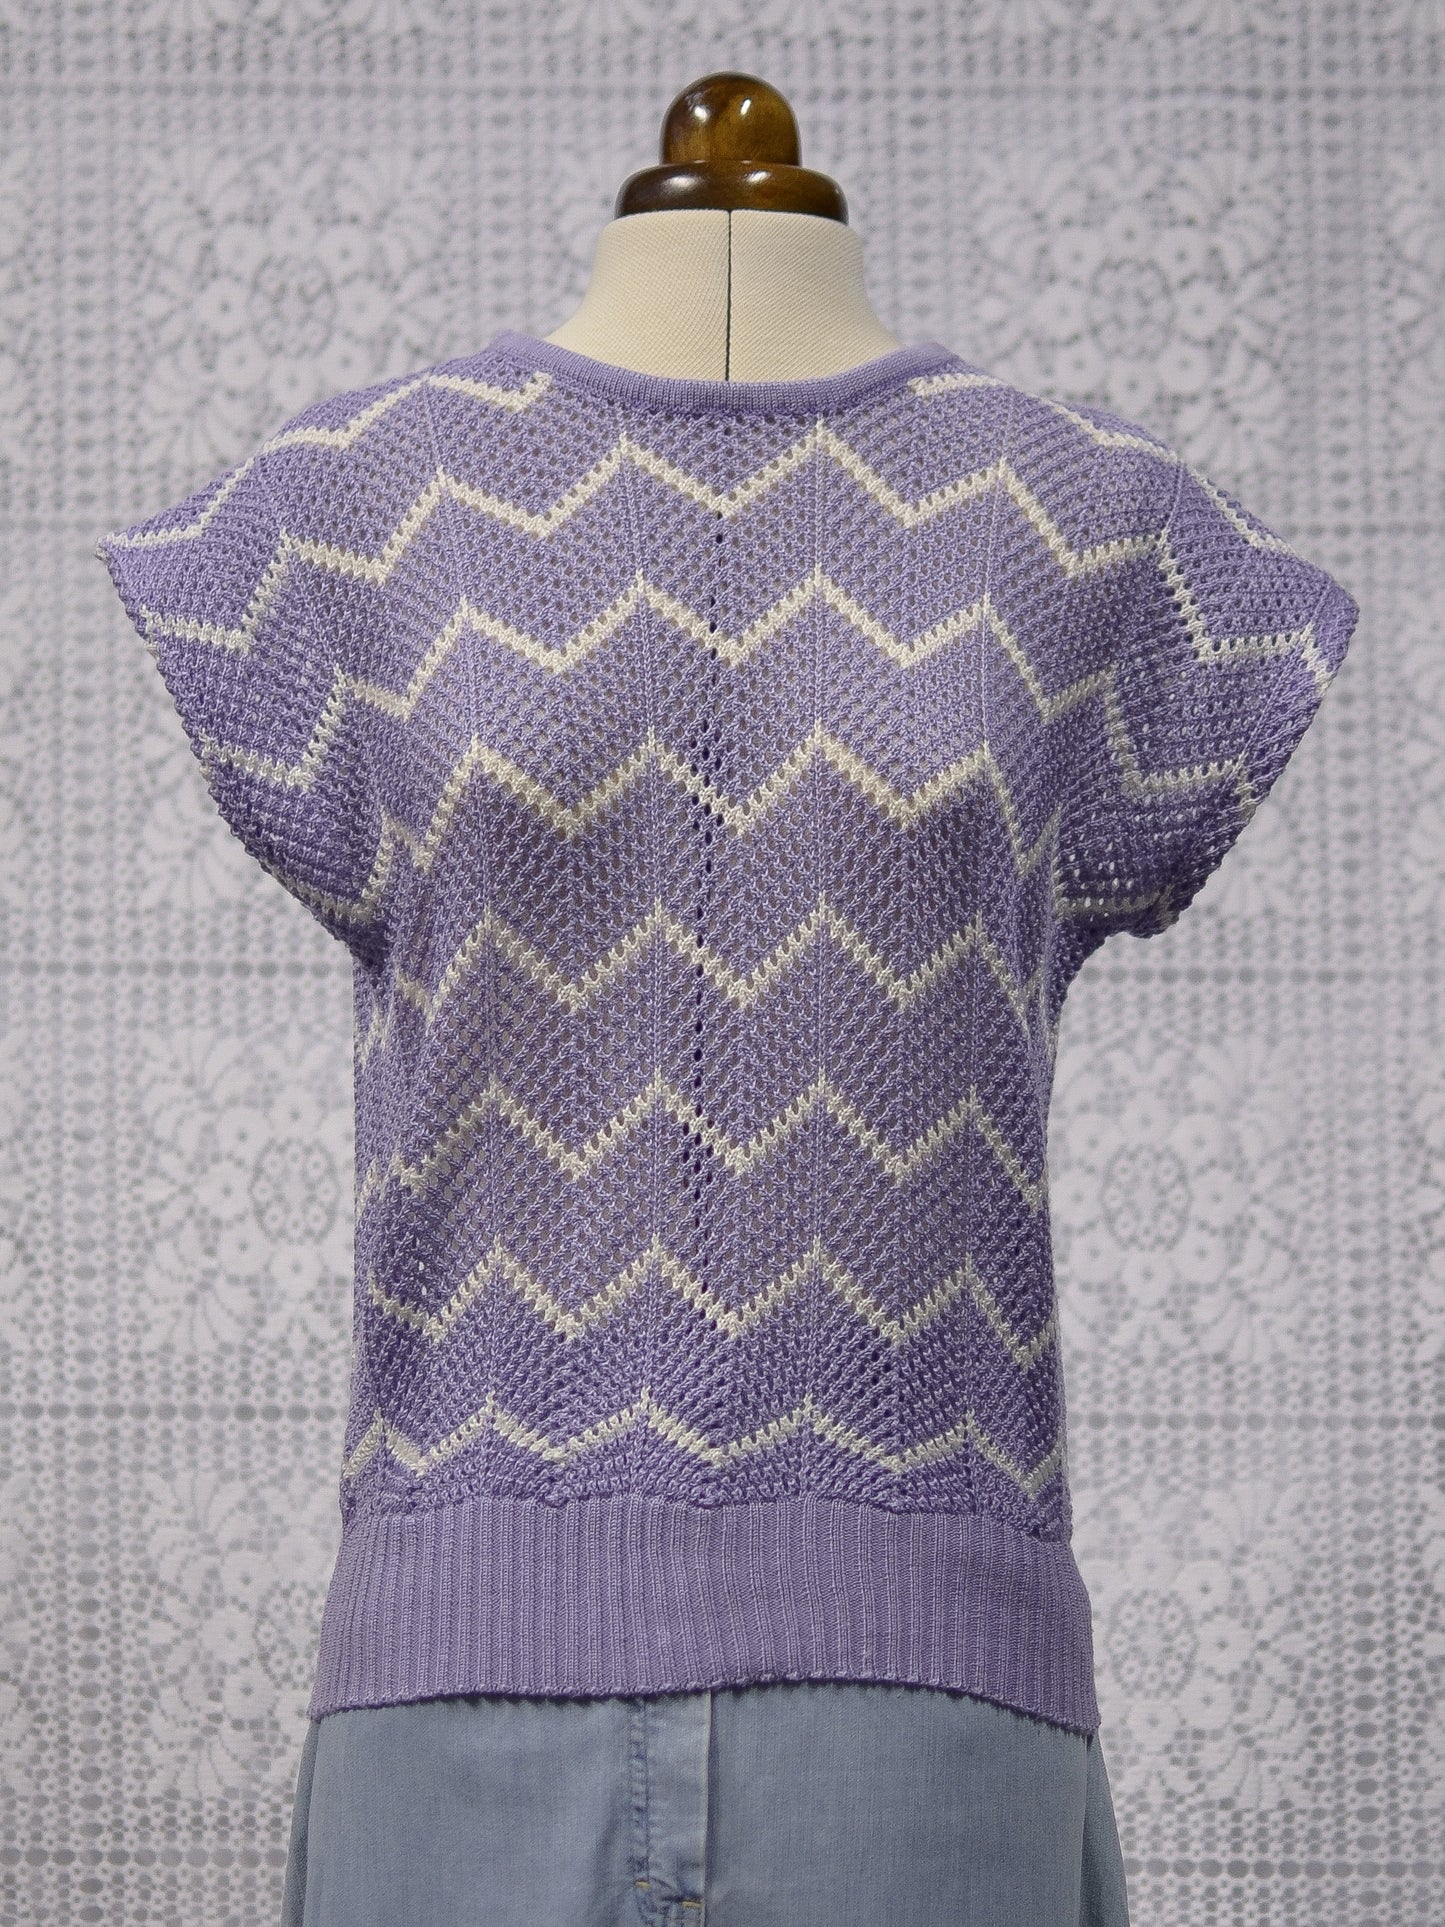 1980s lilac purple and white zigzag sleeveless crochet jumper sweater vest